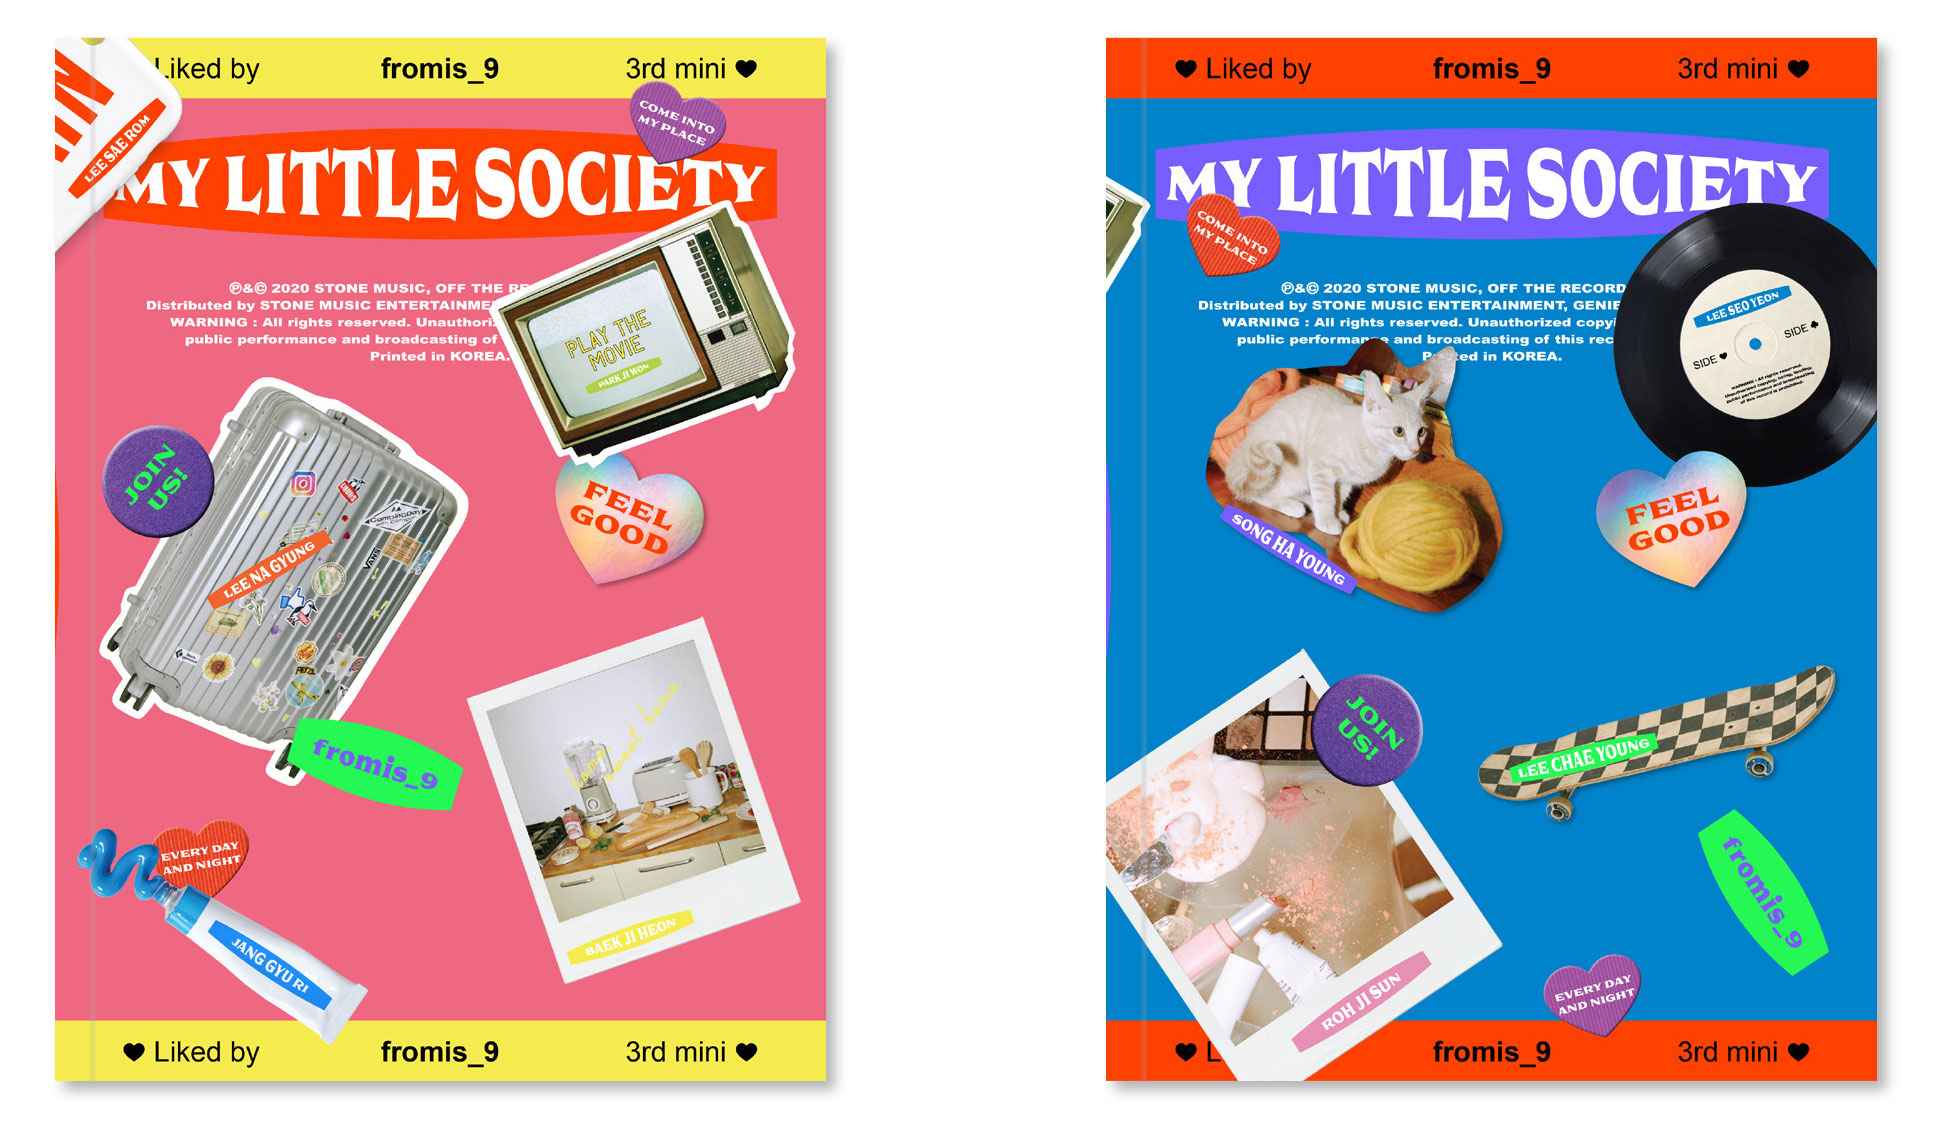 My Little Society | fromis_9